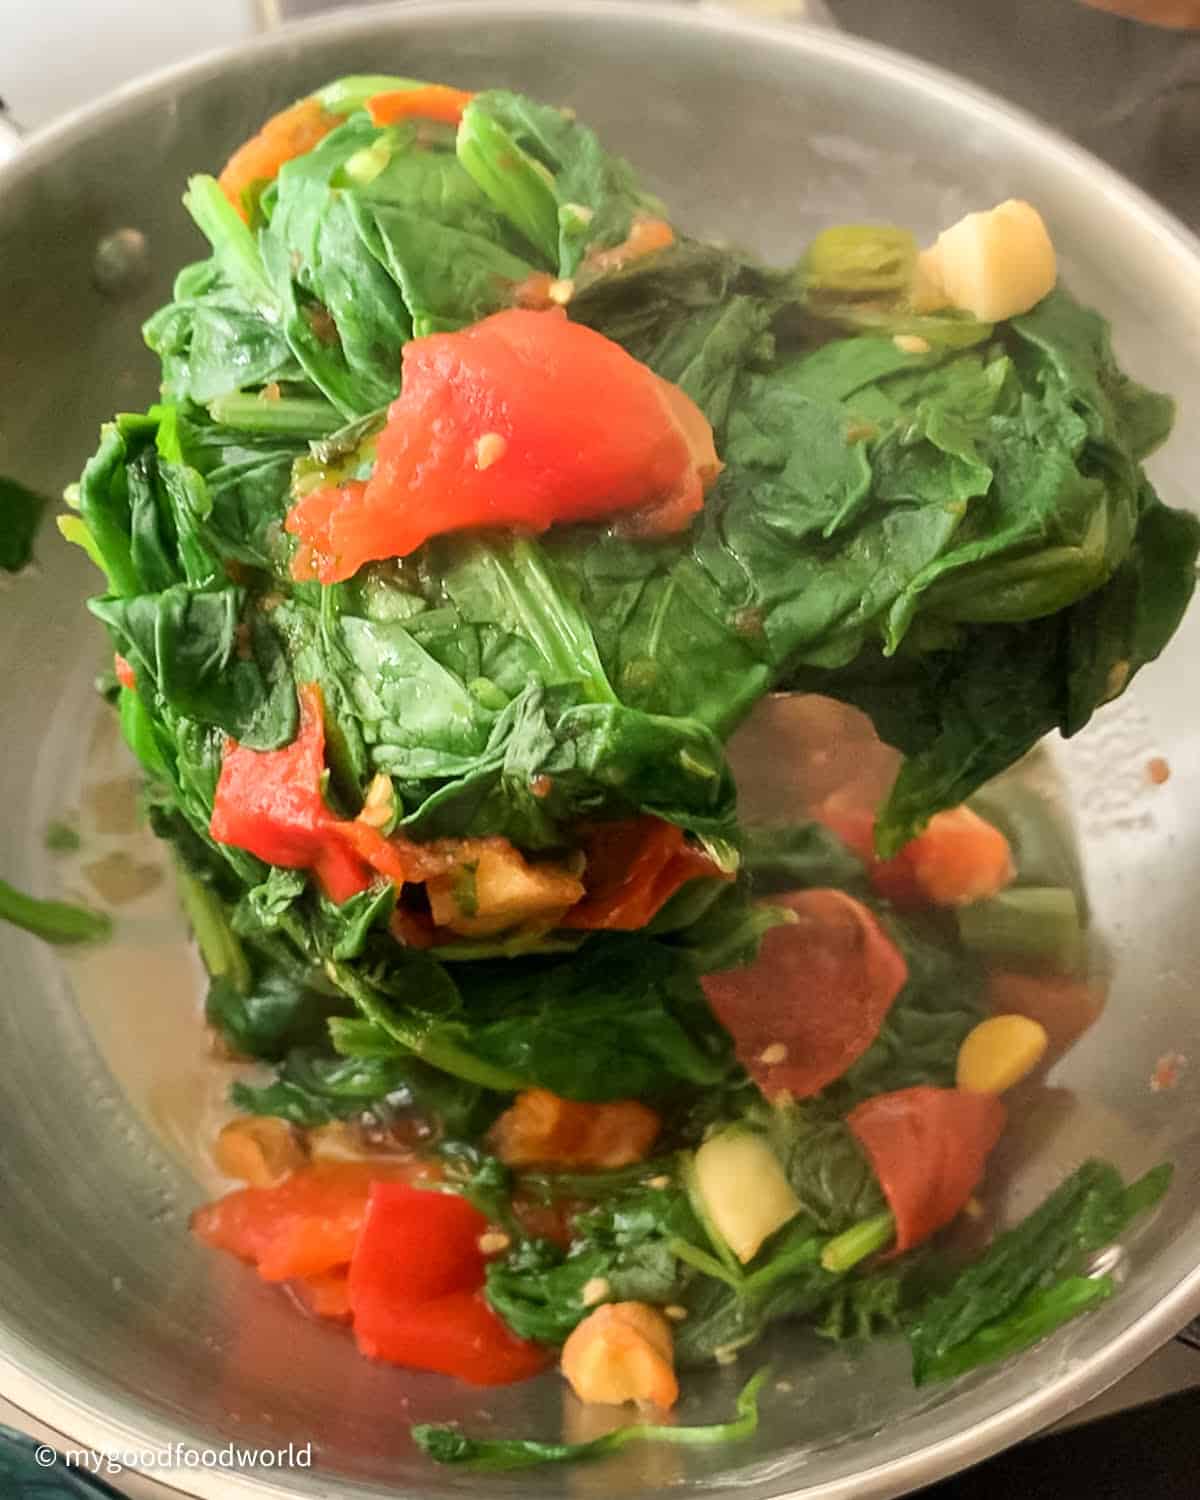 For Punjabi palak paneer sabji, spinach is being cooked with tomatoes, garlic, and ginger being scooped up with a spoon from a stainless steel wok.